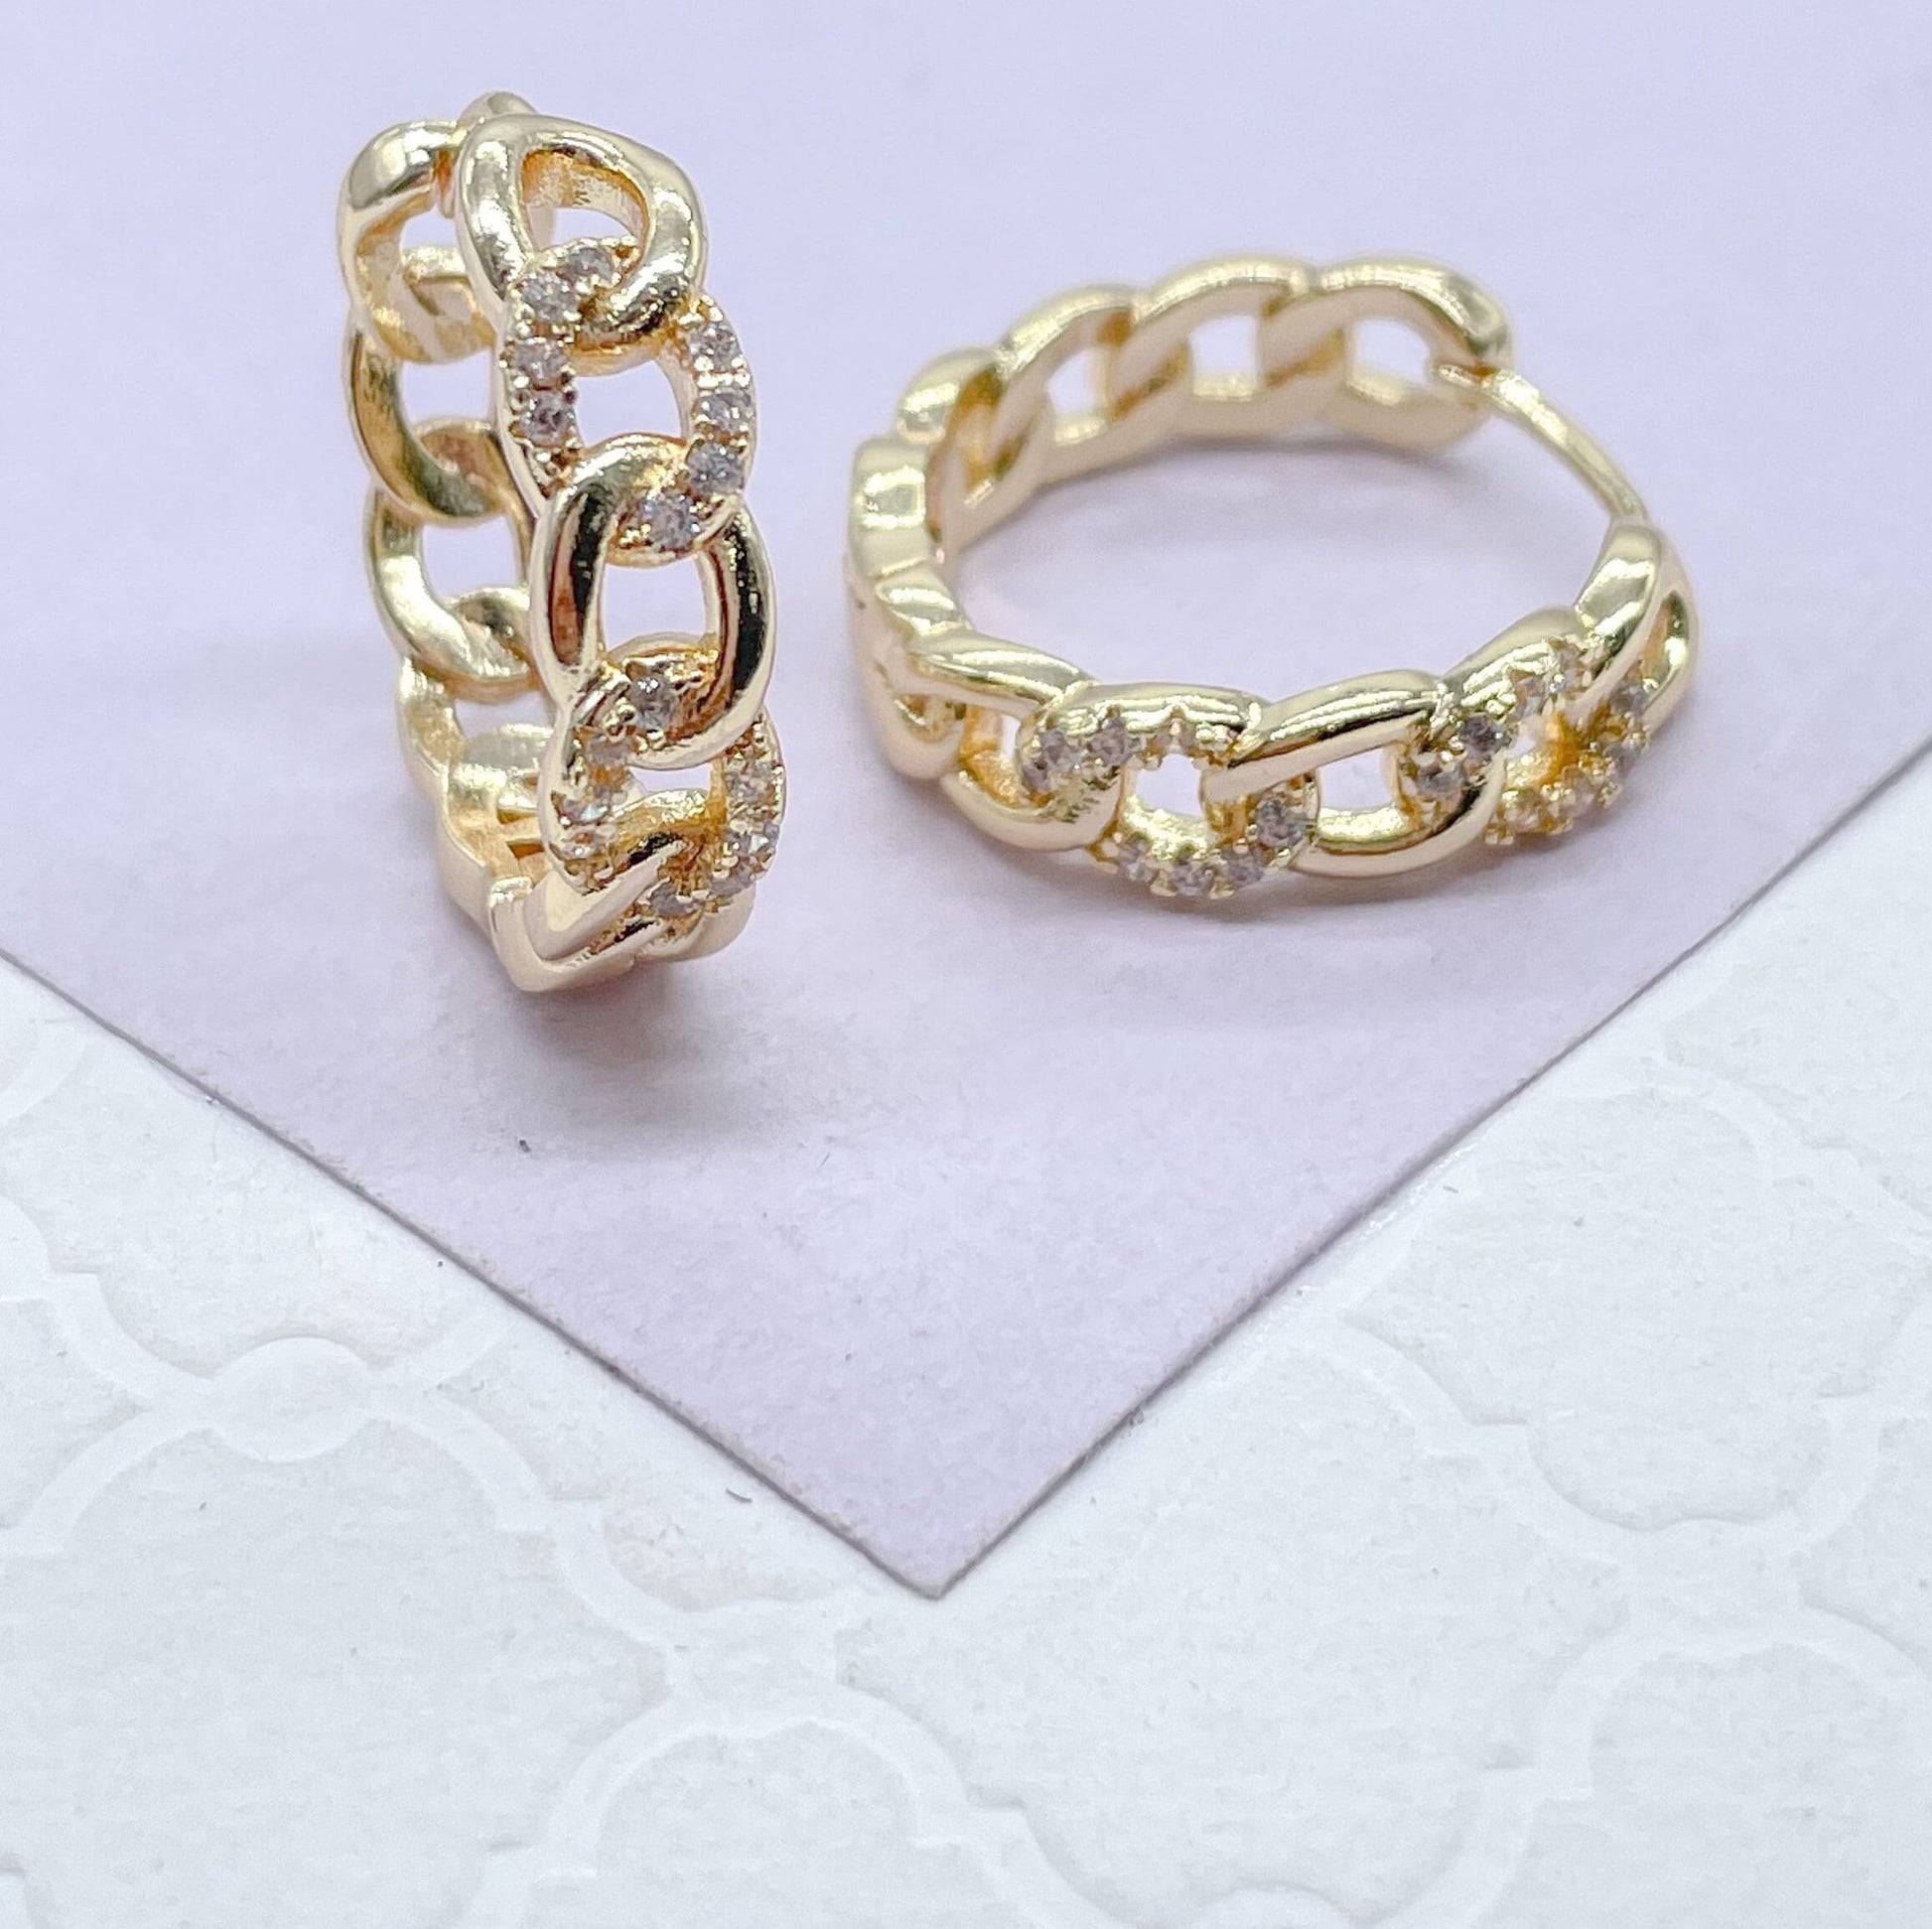 18k Gold Filled Chain Link Huggie Earring With CZ Stones